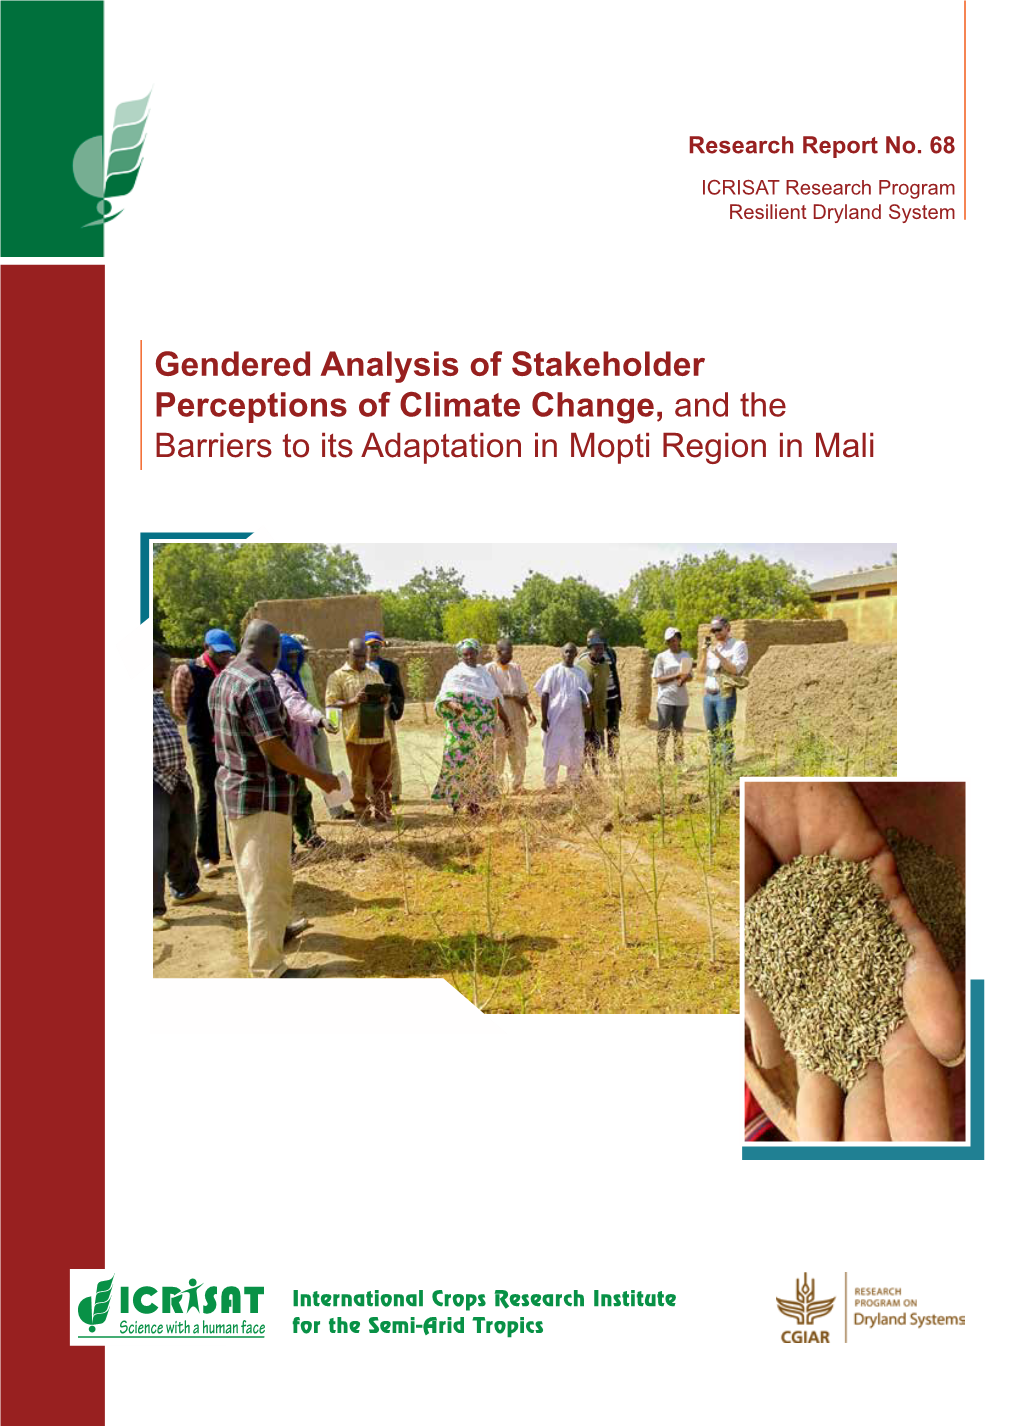 Gendered Analysis of Stakeholder Perceptions of Climate Change, and the Barriers to Its Adaptation in Mopti Region in Mali